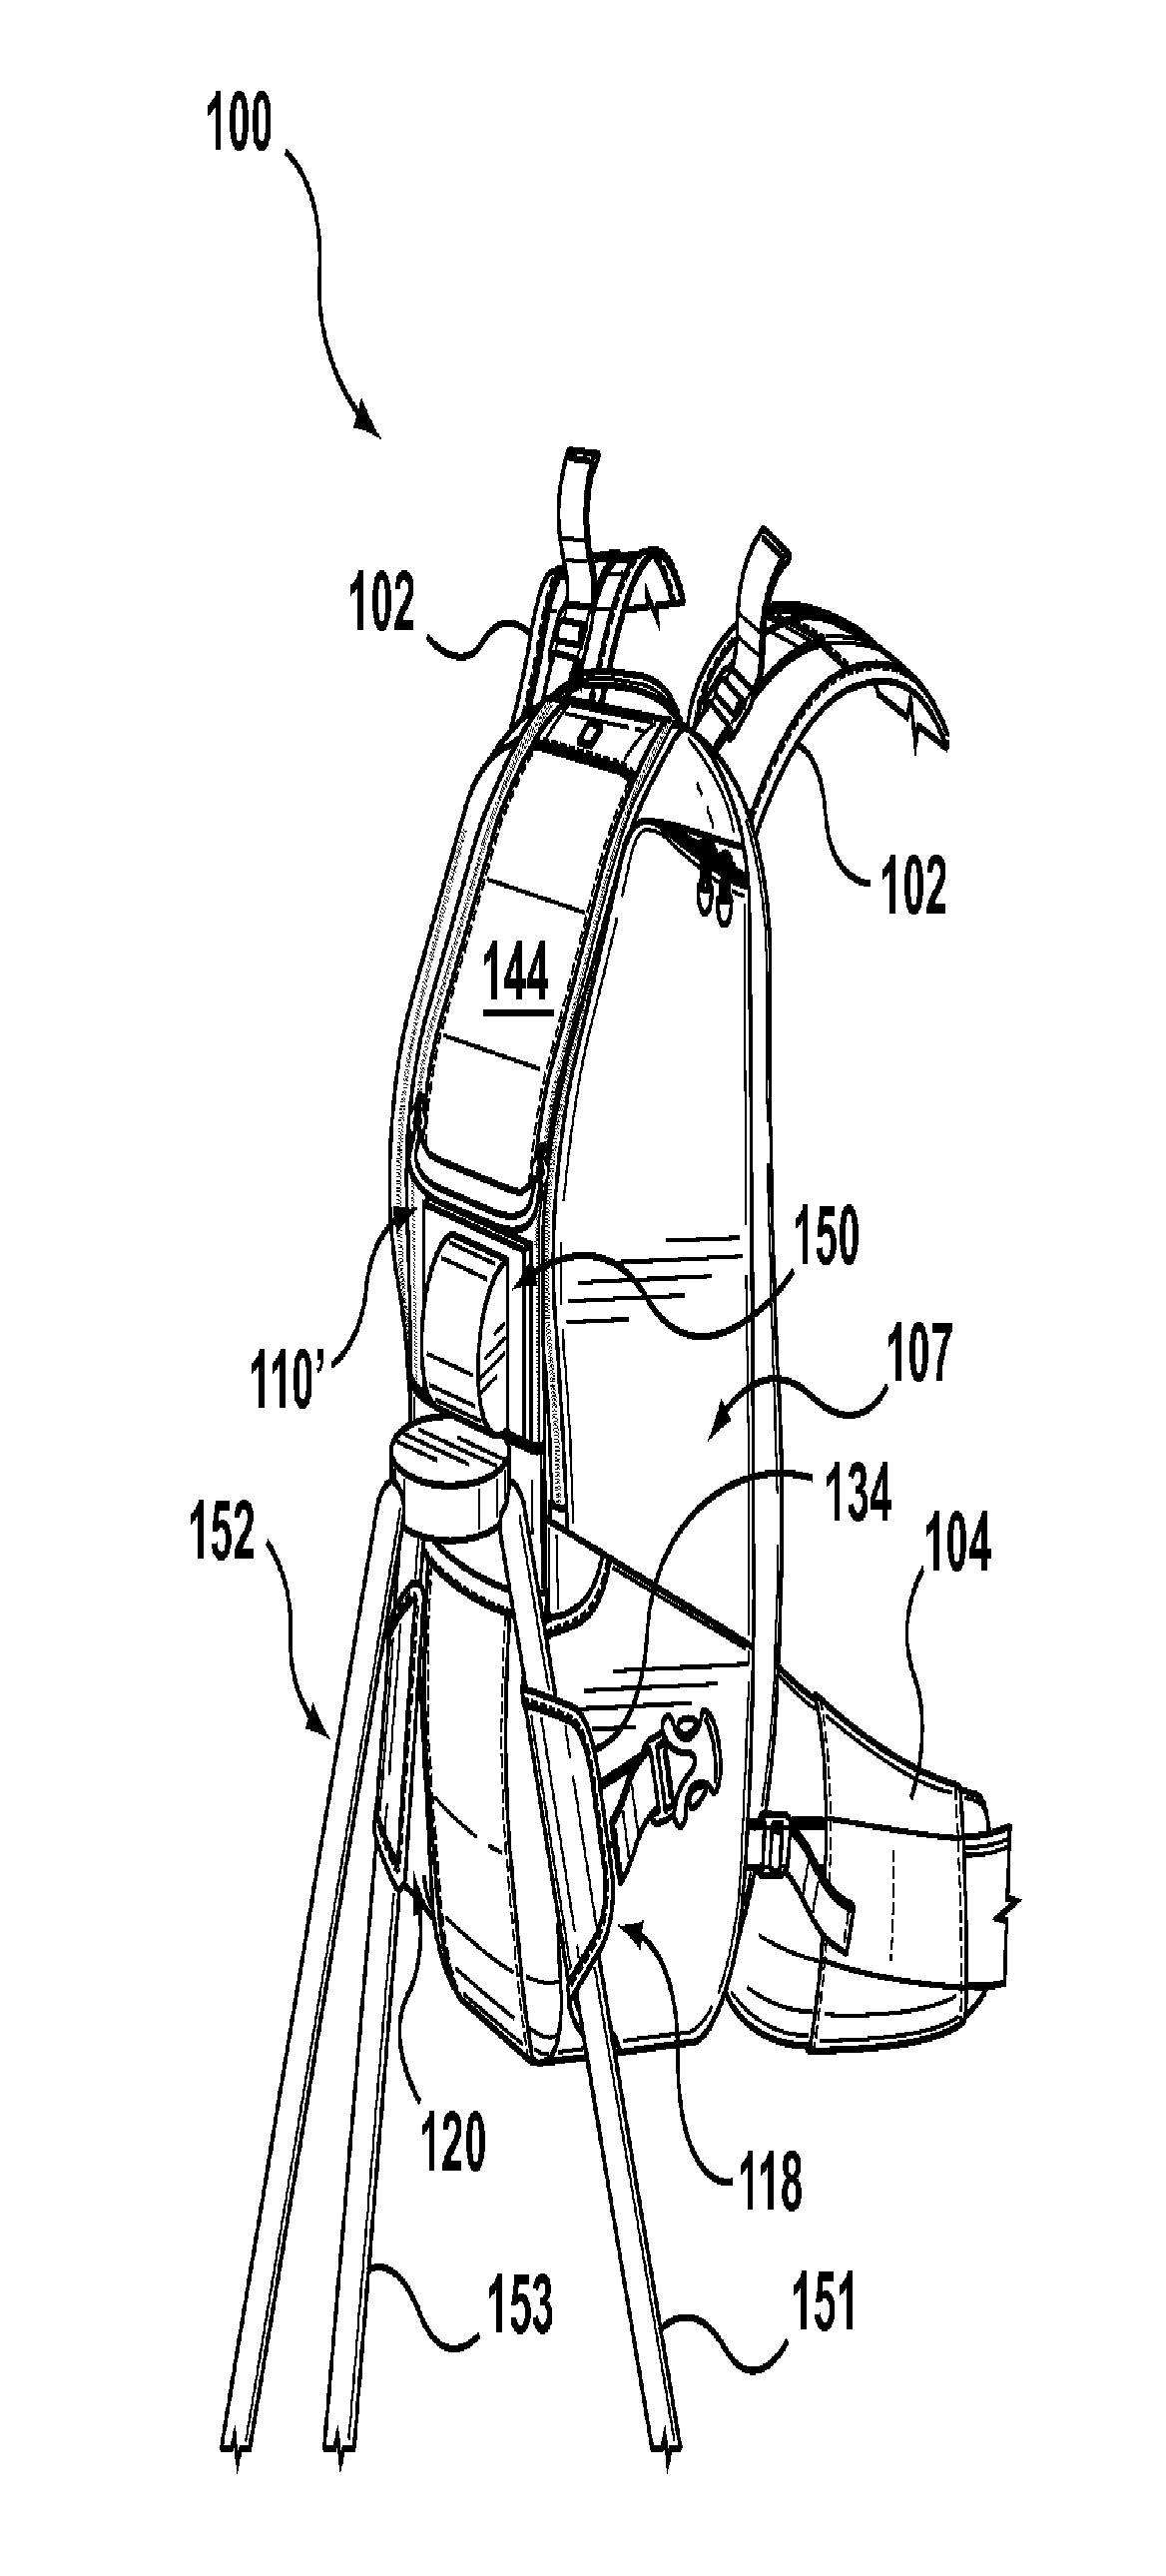 Infield backpack for carrying a spotting scope attached to a tripod